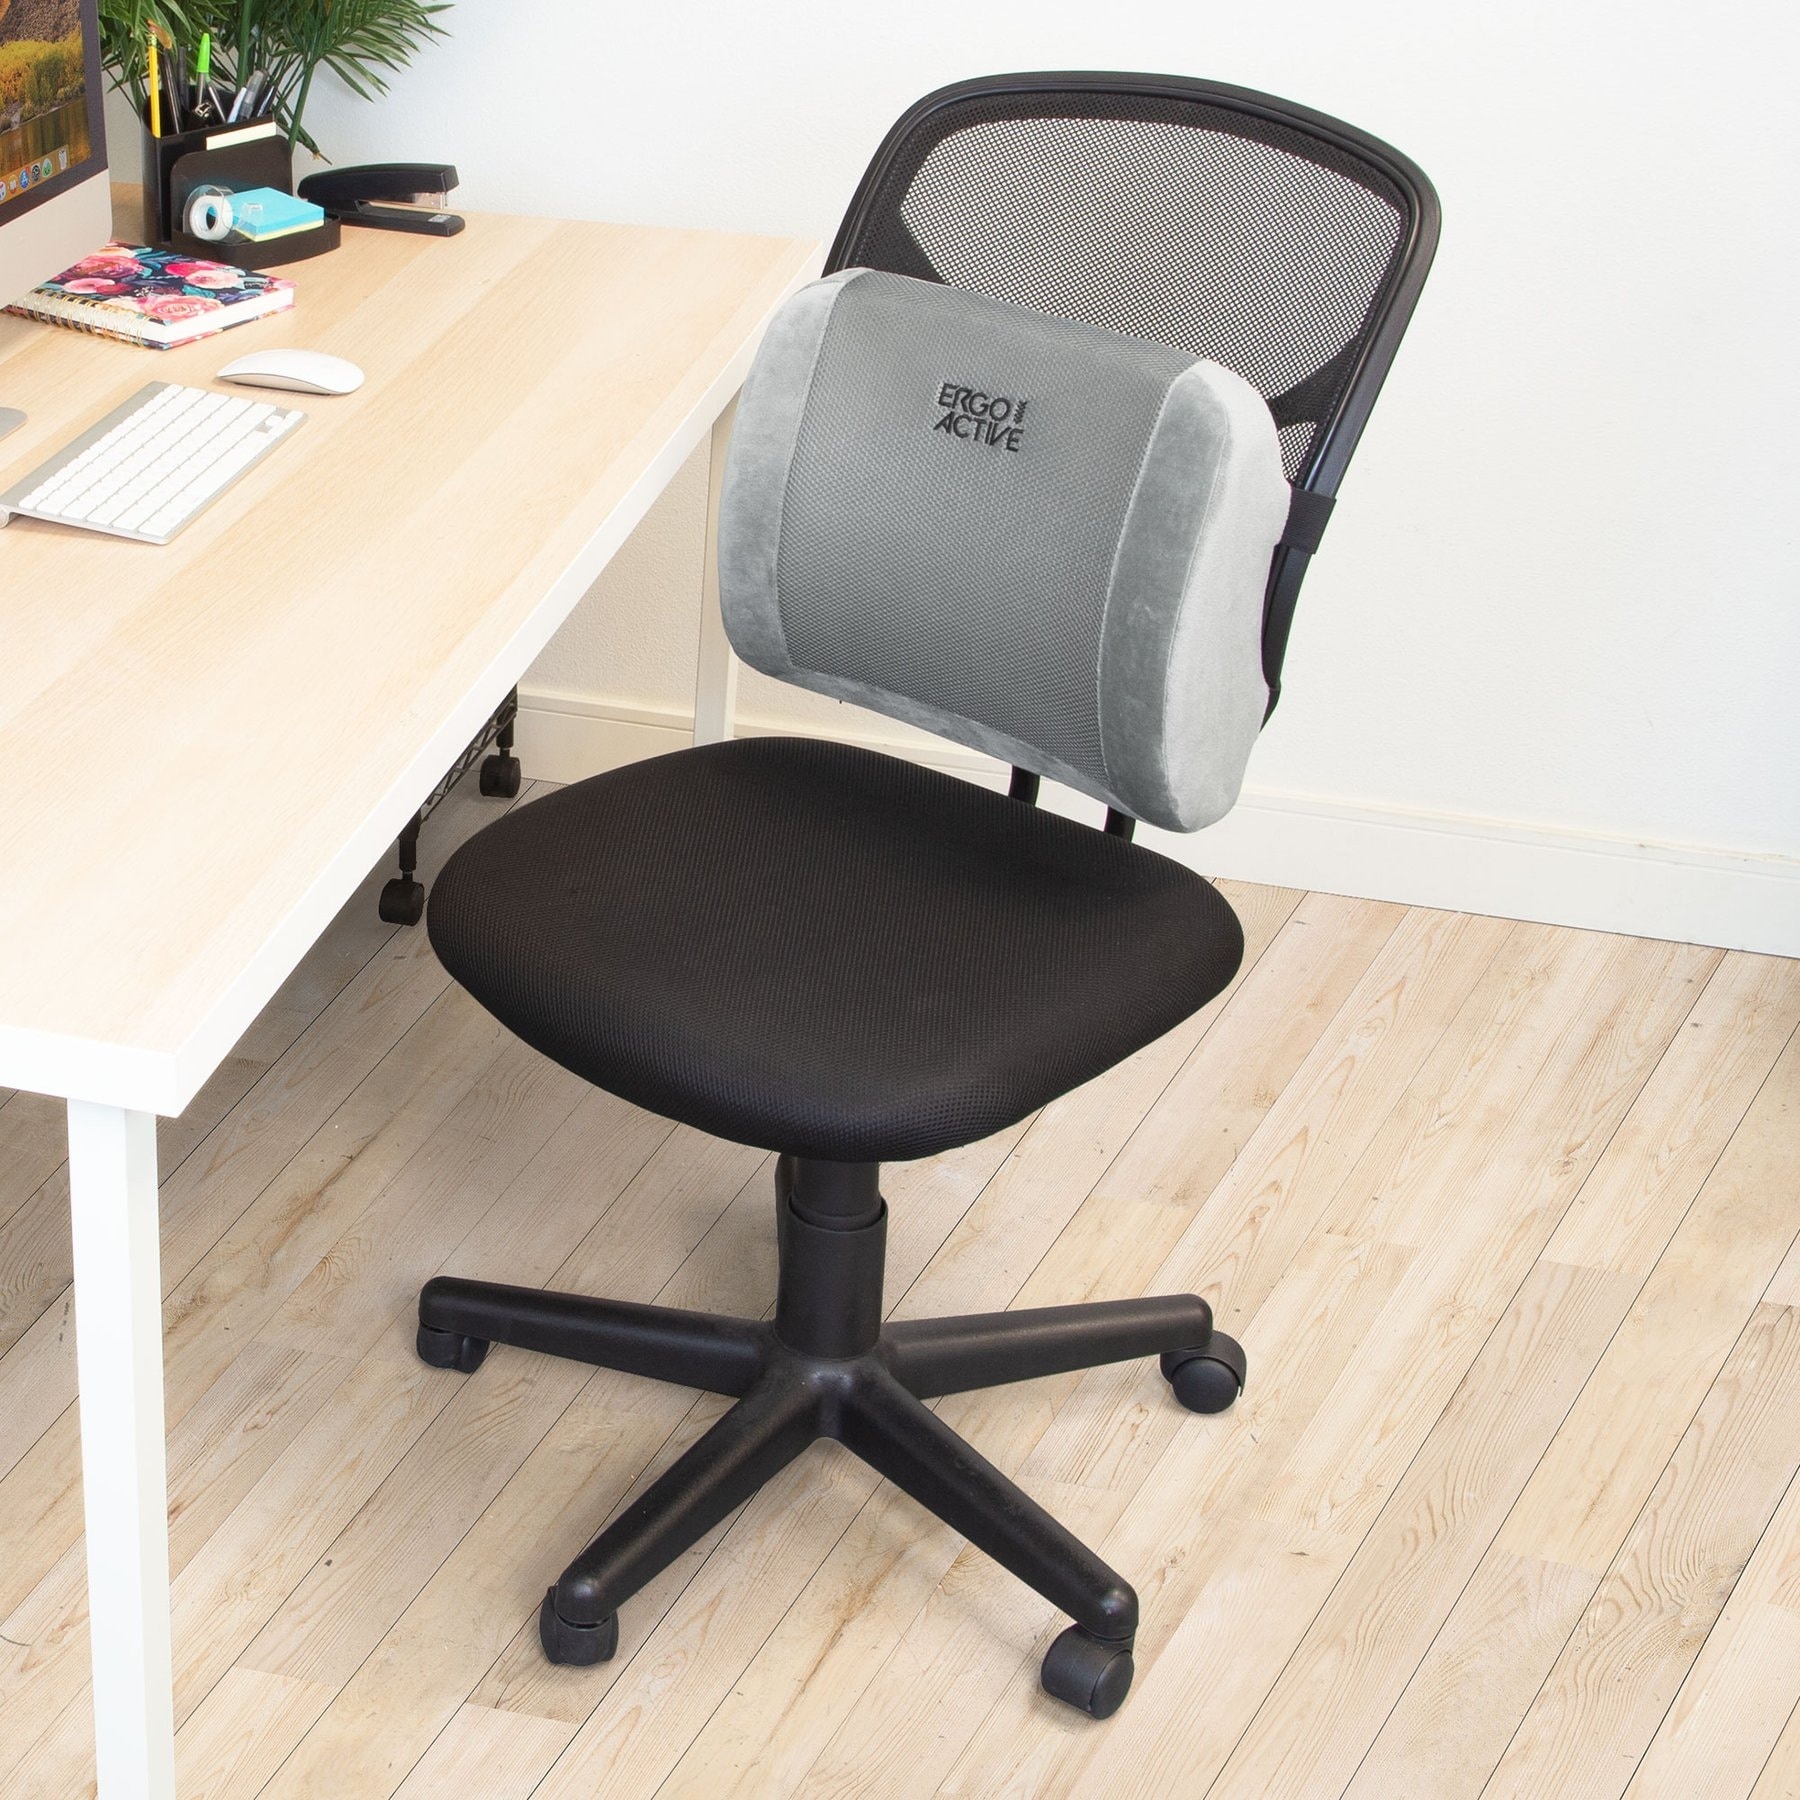 https://ak1.ostkcdn.com/images/products/is/images/direct/7b76585852eed3d93f34a44d6a1bf1467e6533e1/ComfiLife-Lumbar-Support-Back-Pillow-Office-Chair.jpg